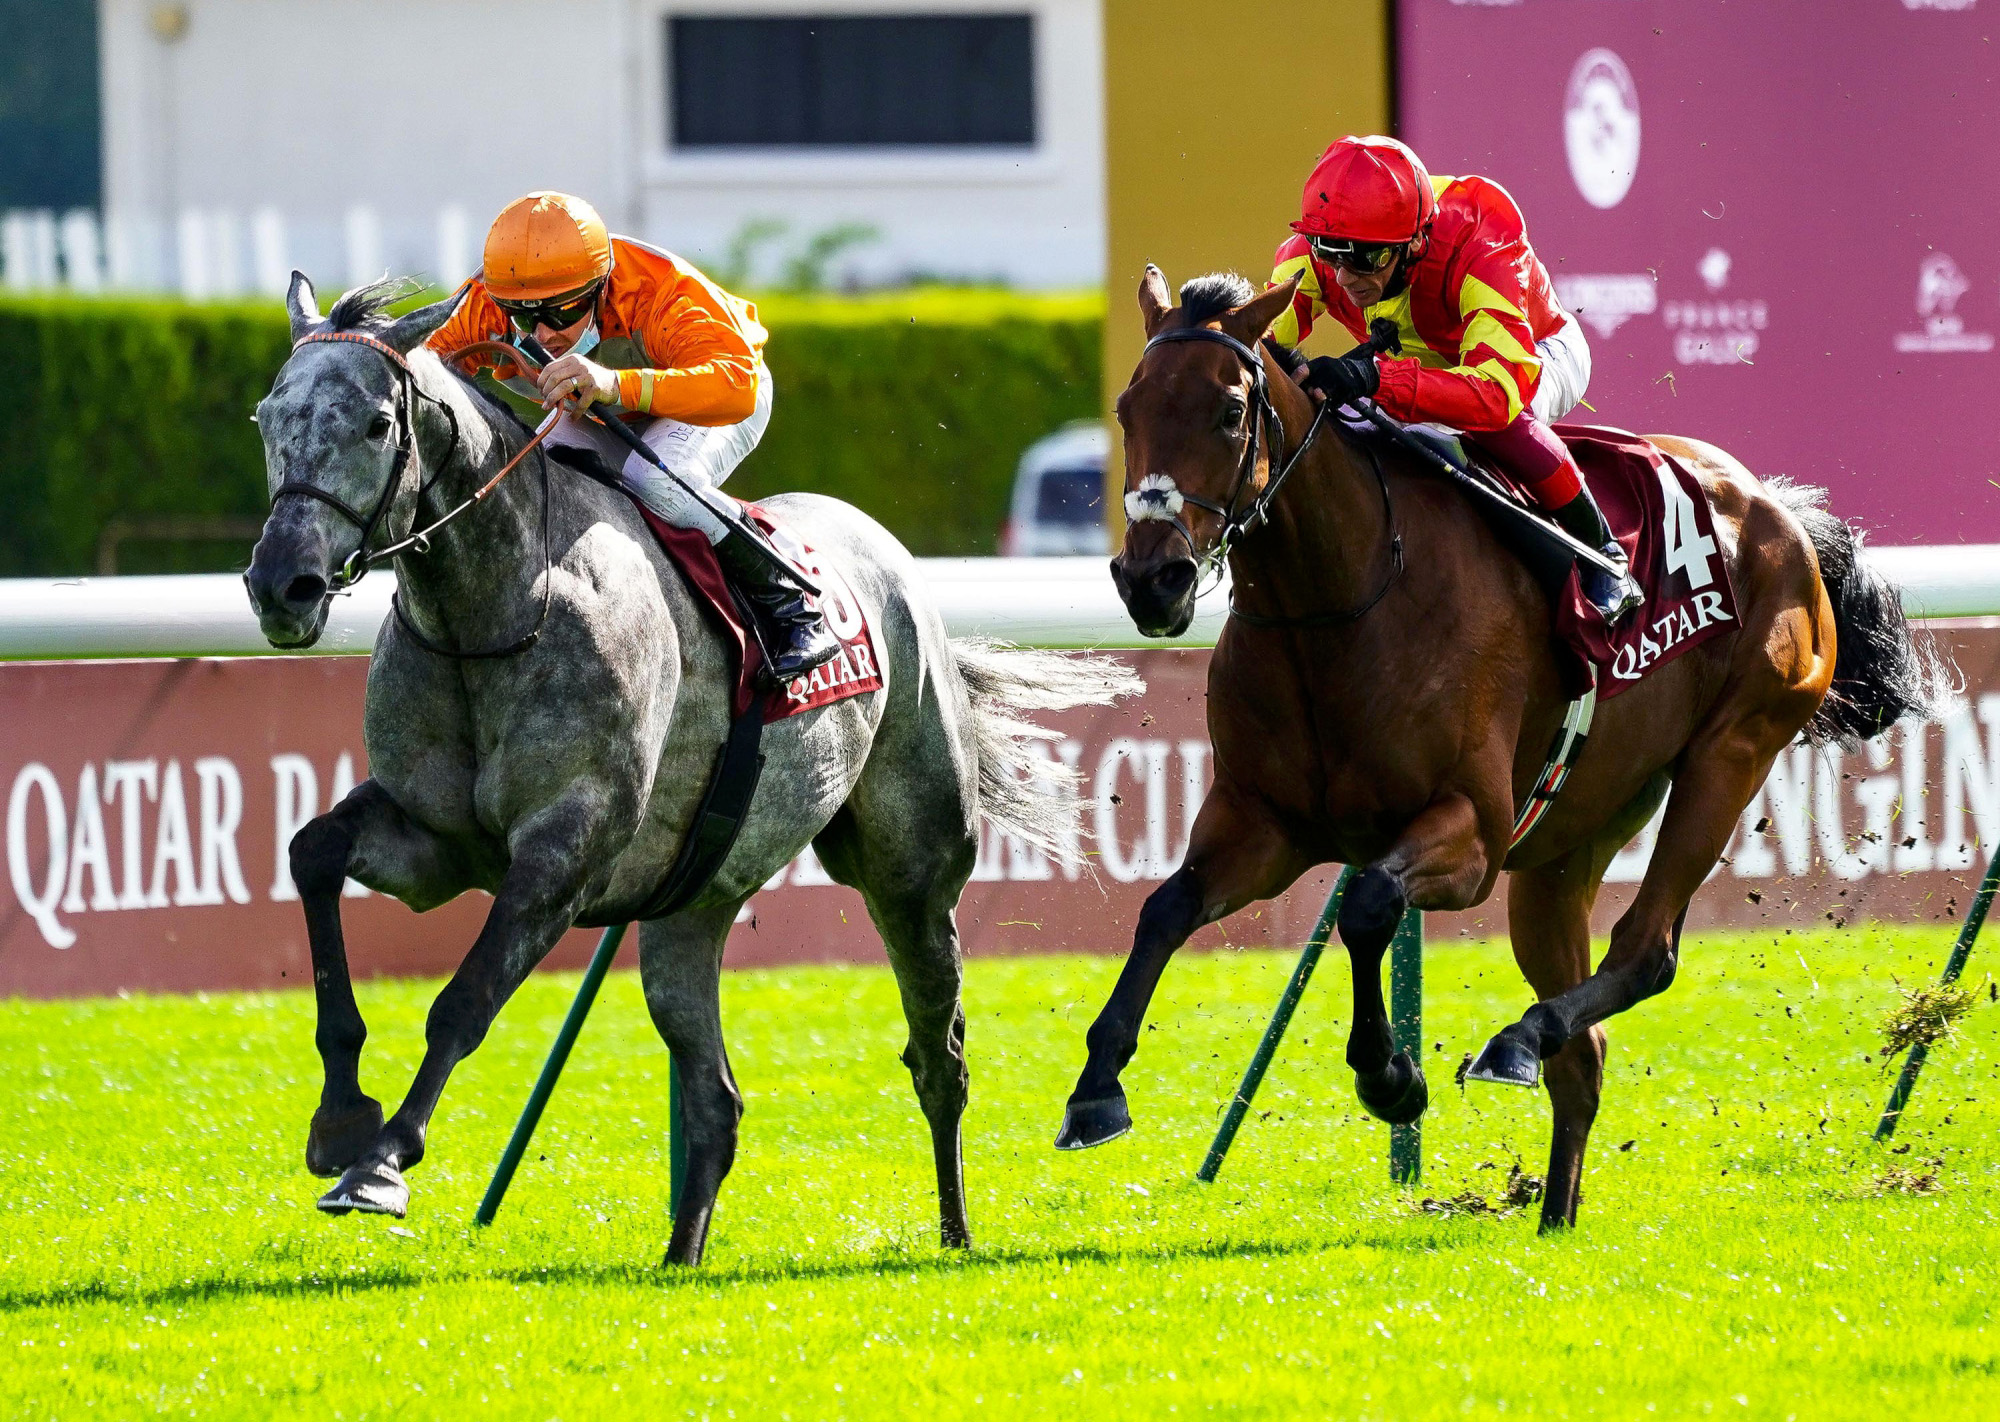 Skalleti – FR : Top-class French performer who beat subsequent Prix de l’Arc de Triomphe winner Sottsass in G3 at Deauville; last out second in G1 QIPCO British Champion Stakes.